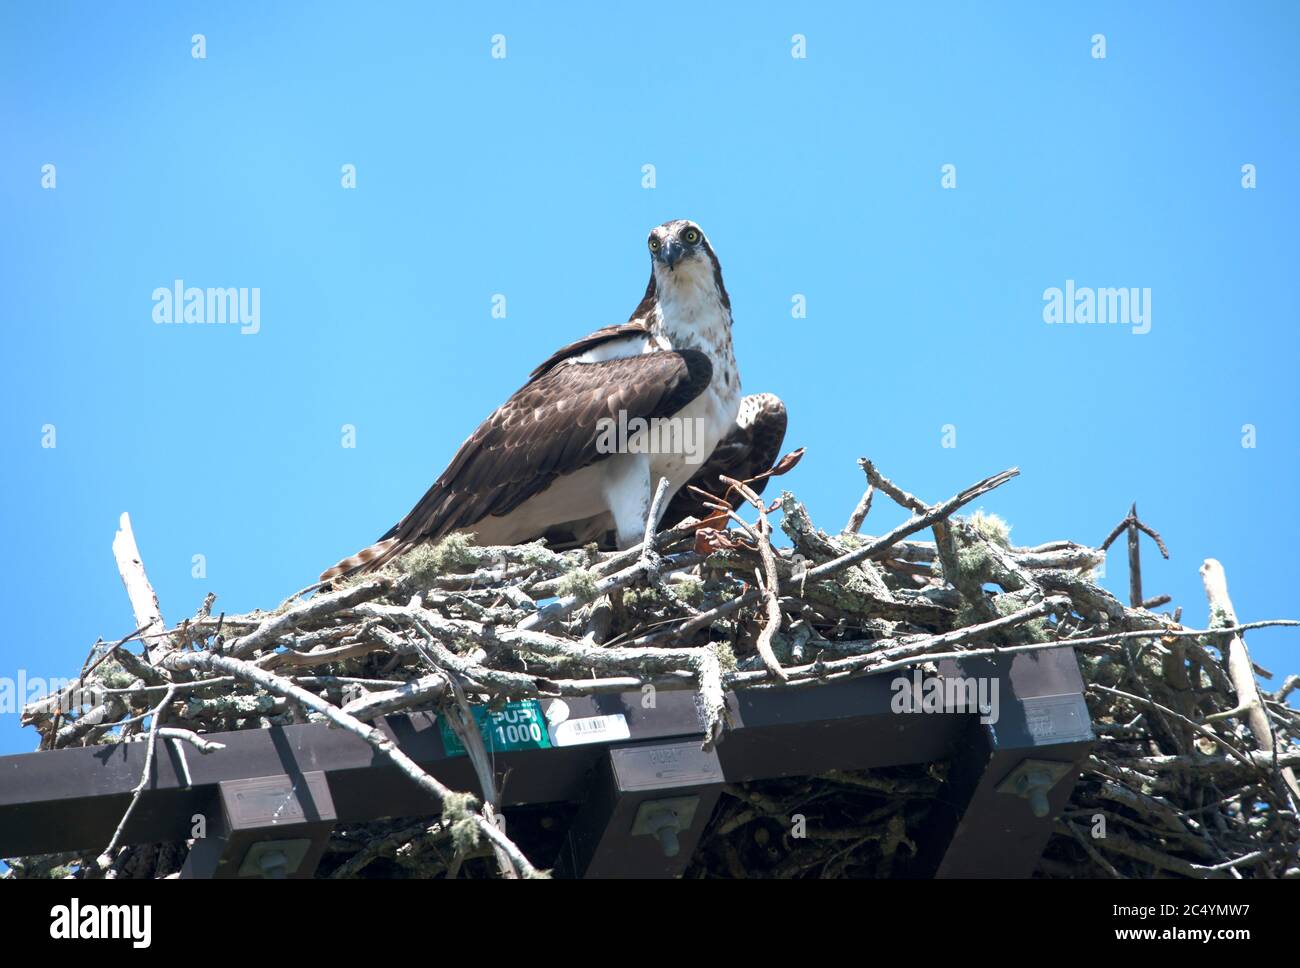 An Osprey (Pandion haliaetus) and her nest on a utility pole in Barnstable, Mass. on Cape Cod, USA Stock Photo